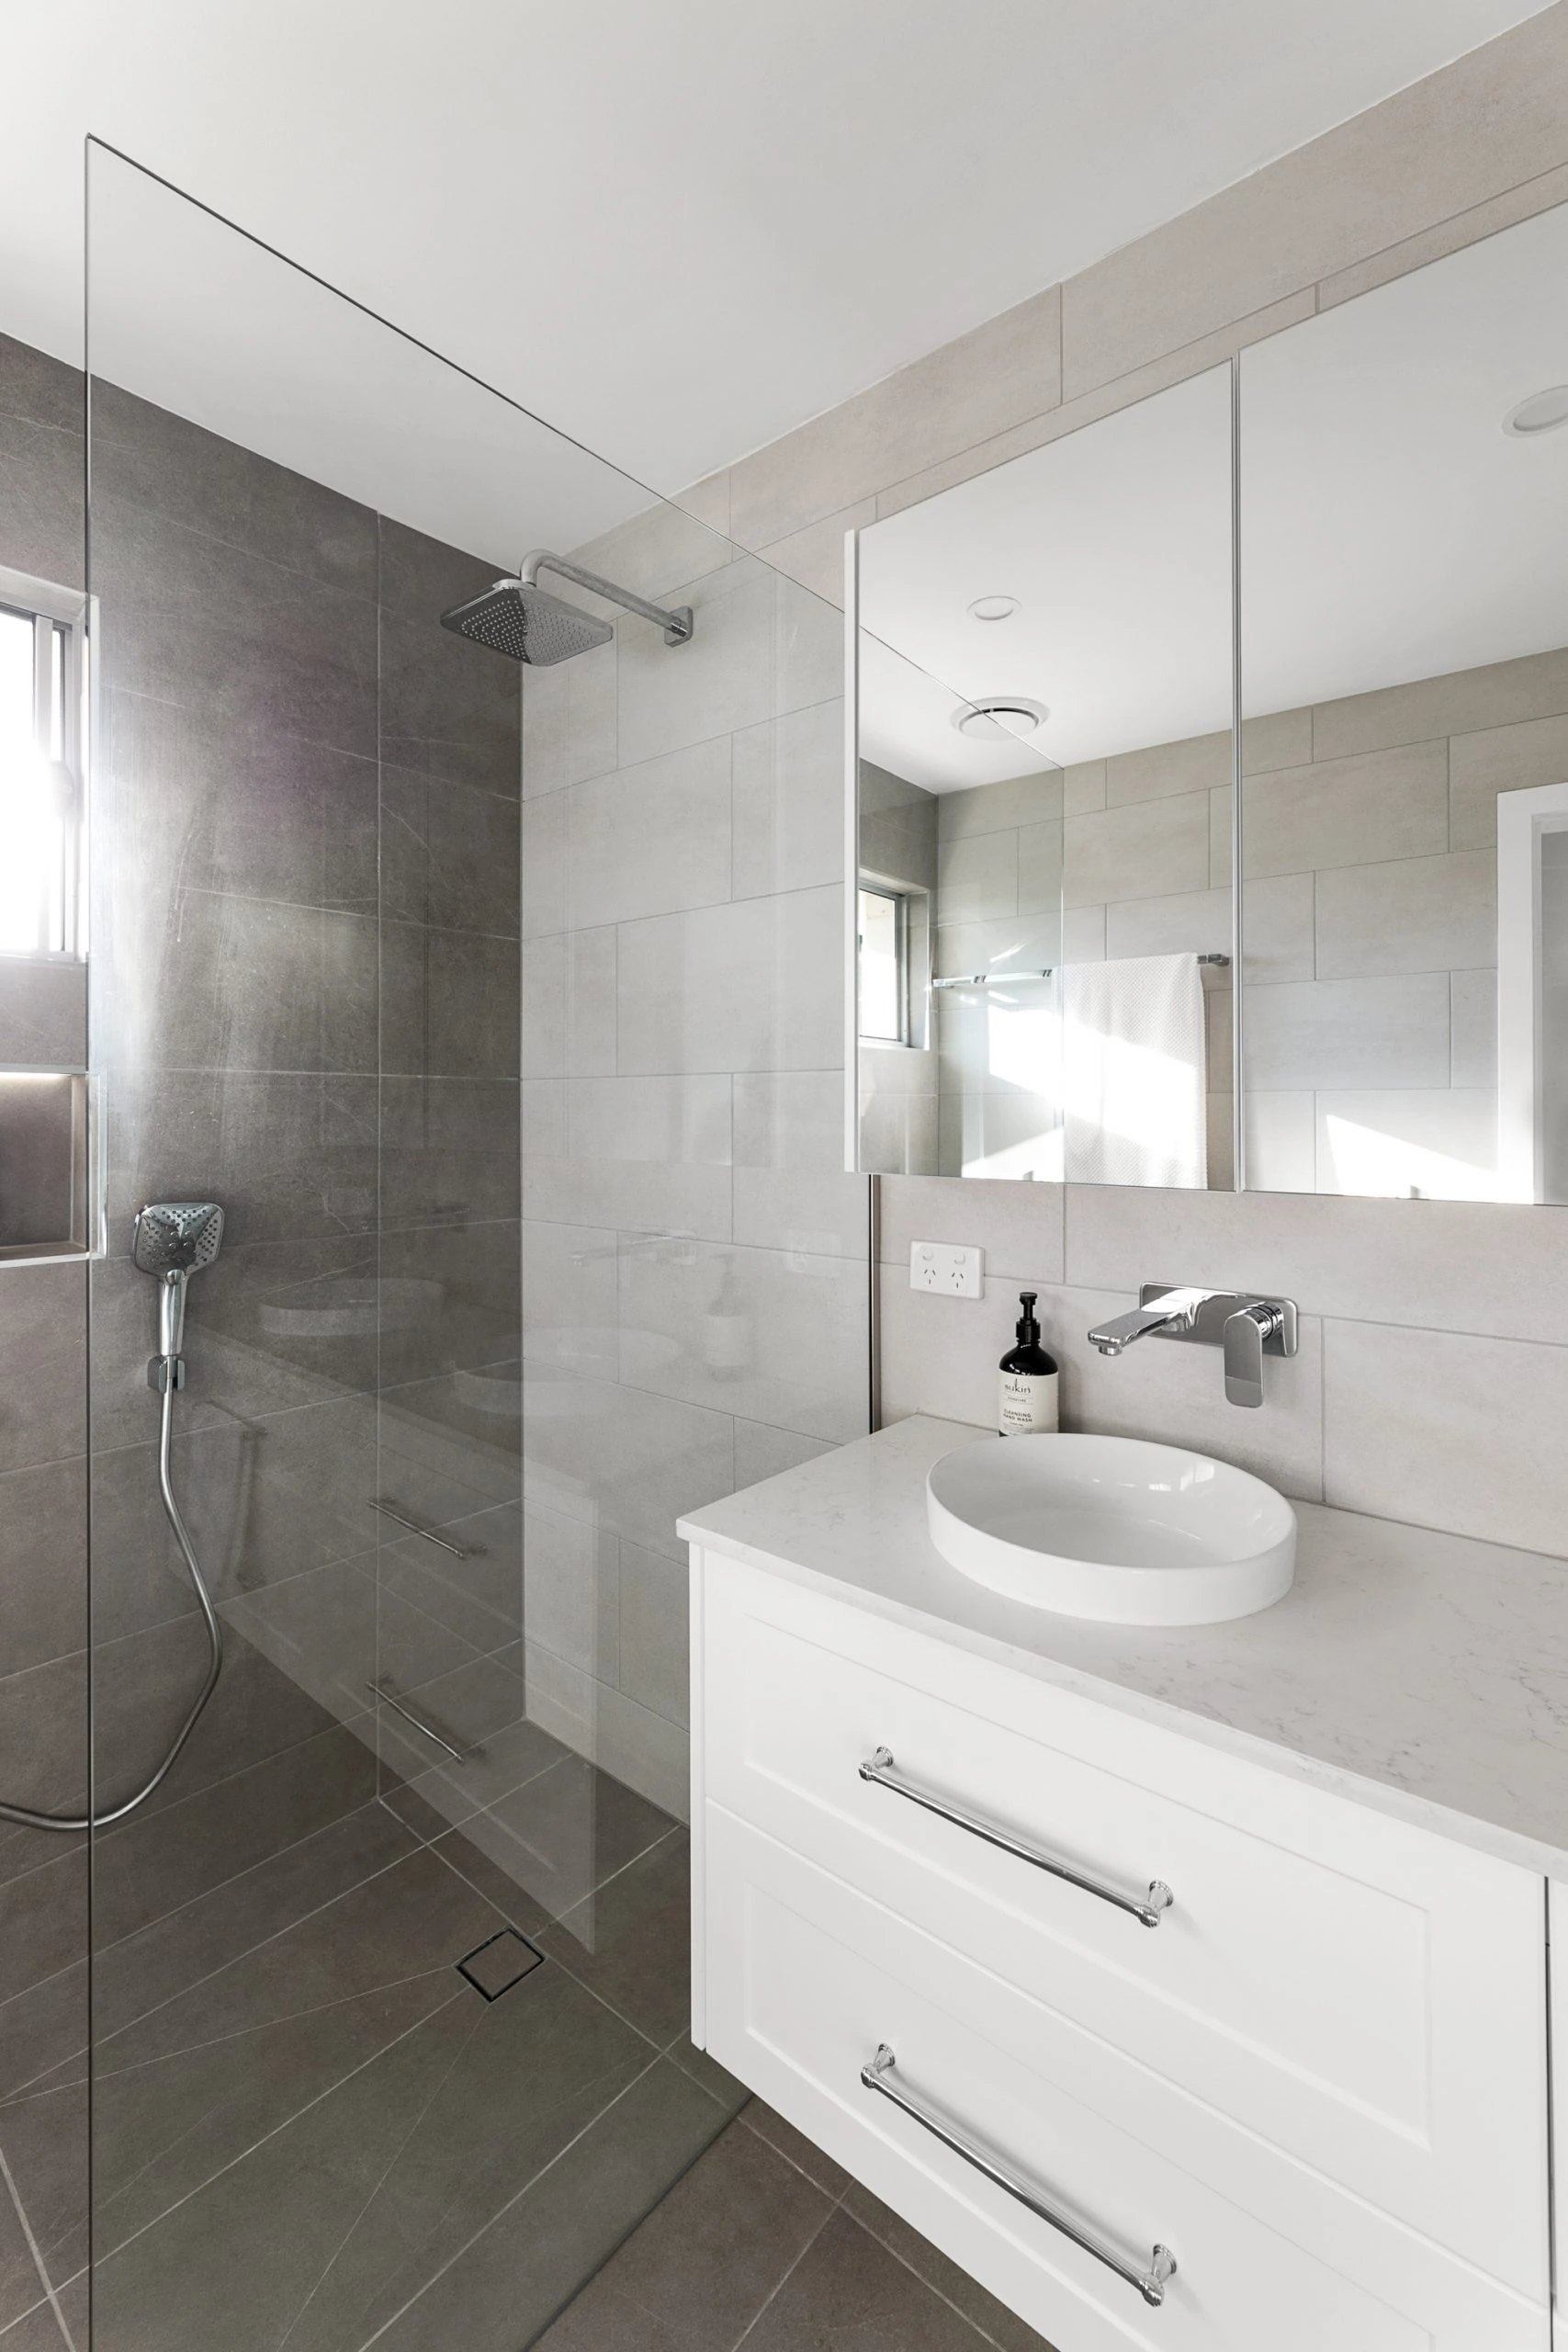 White vanity unit in a modern bathroom featuring a clean class shower screen